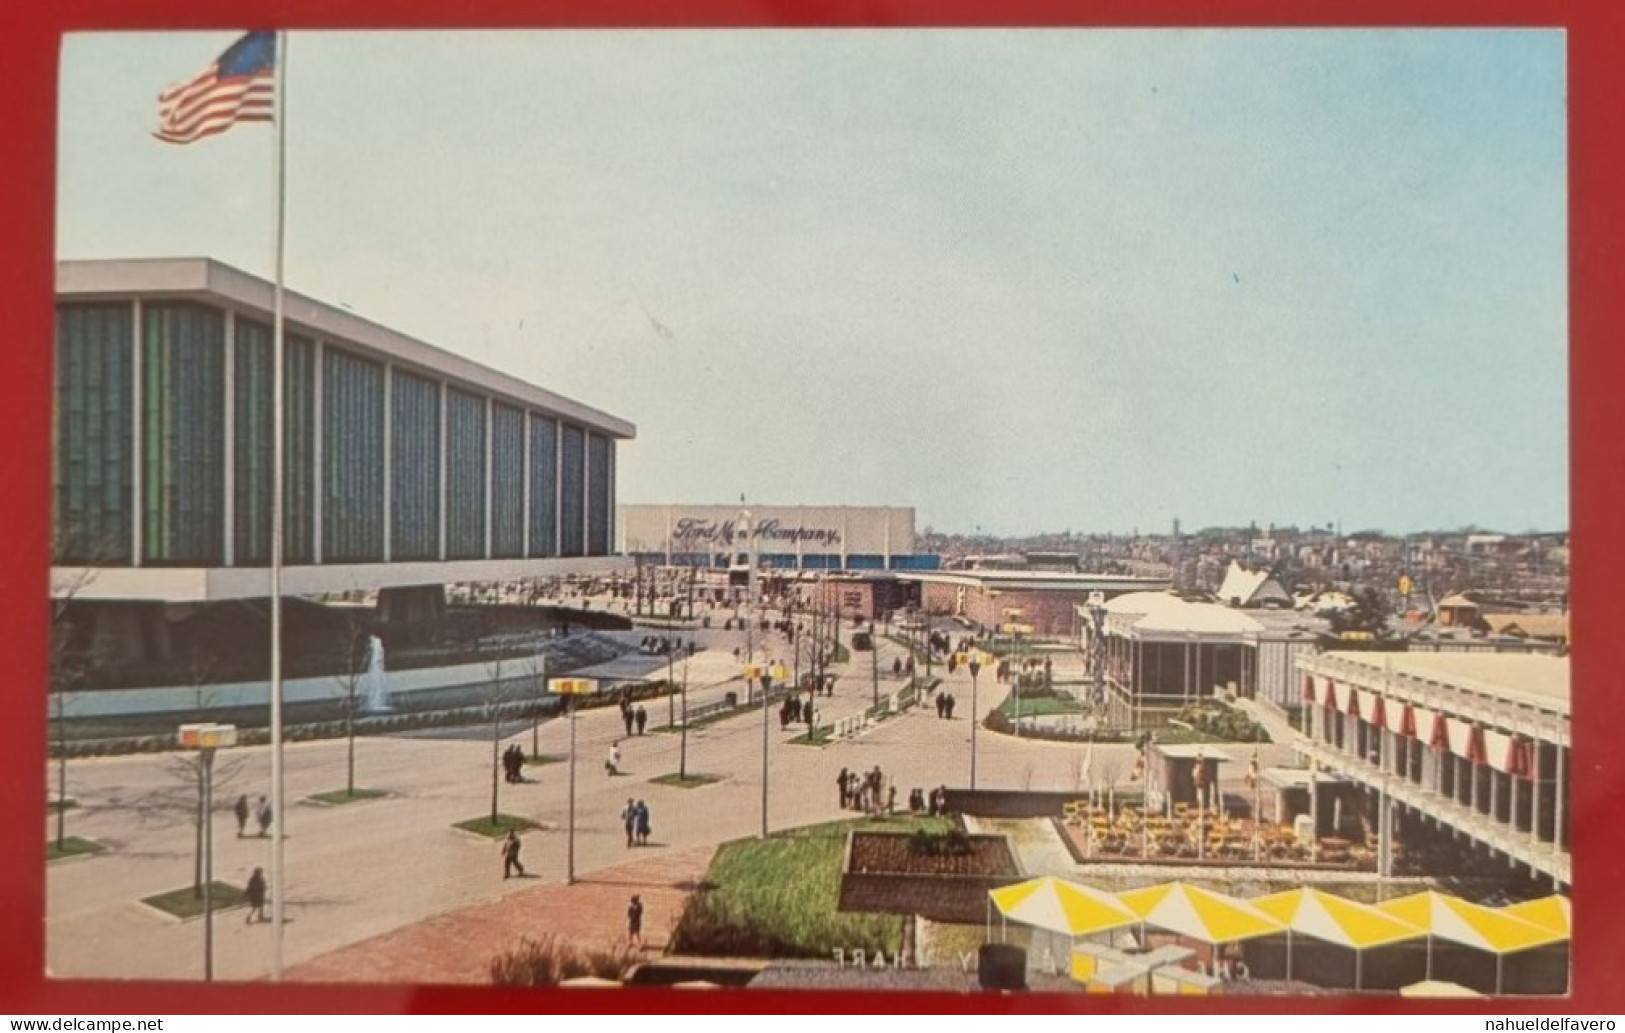 Uncirculated Postcard - USA - NY, NEW YORK WORLD'S FAIR 1964-65 - KENNEDY CIRCLE LOOKING SOUTHWEST - Mostre, Esposizioni